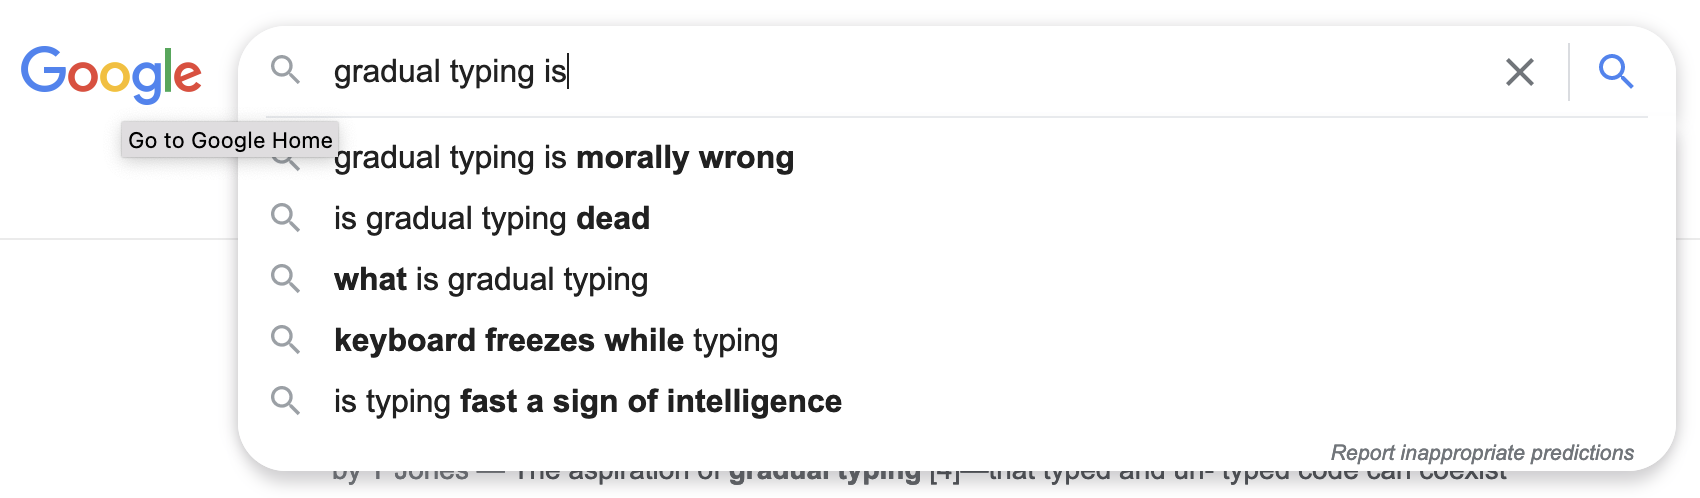 Google search for "gradual typing is"